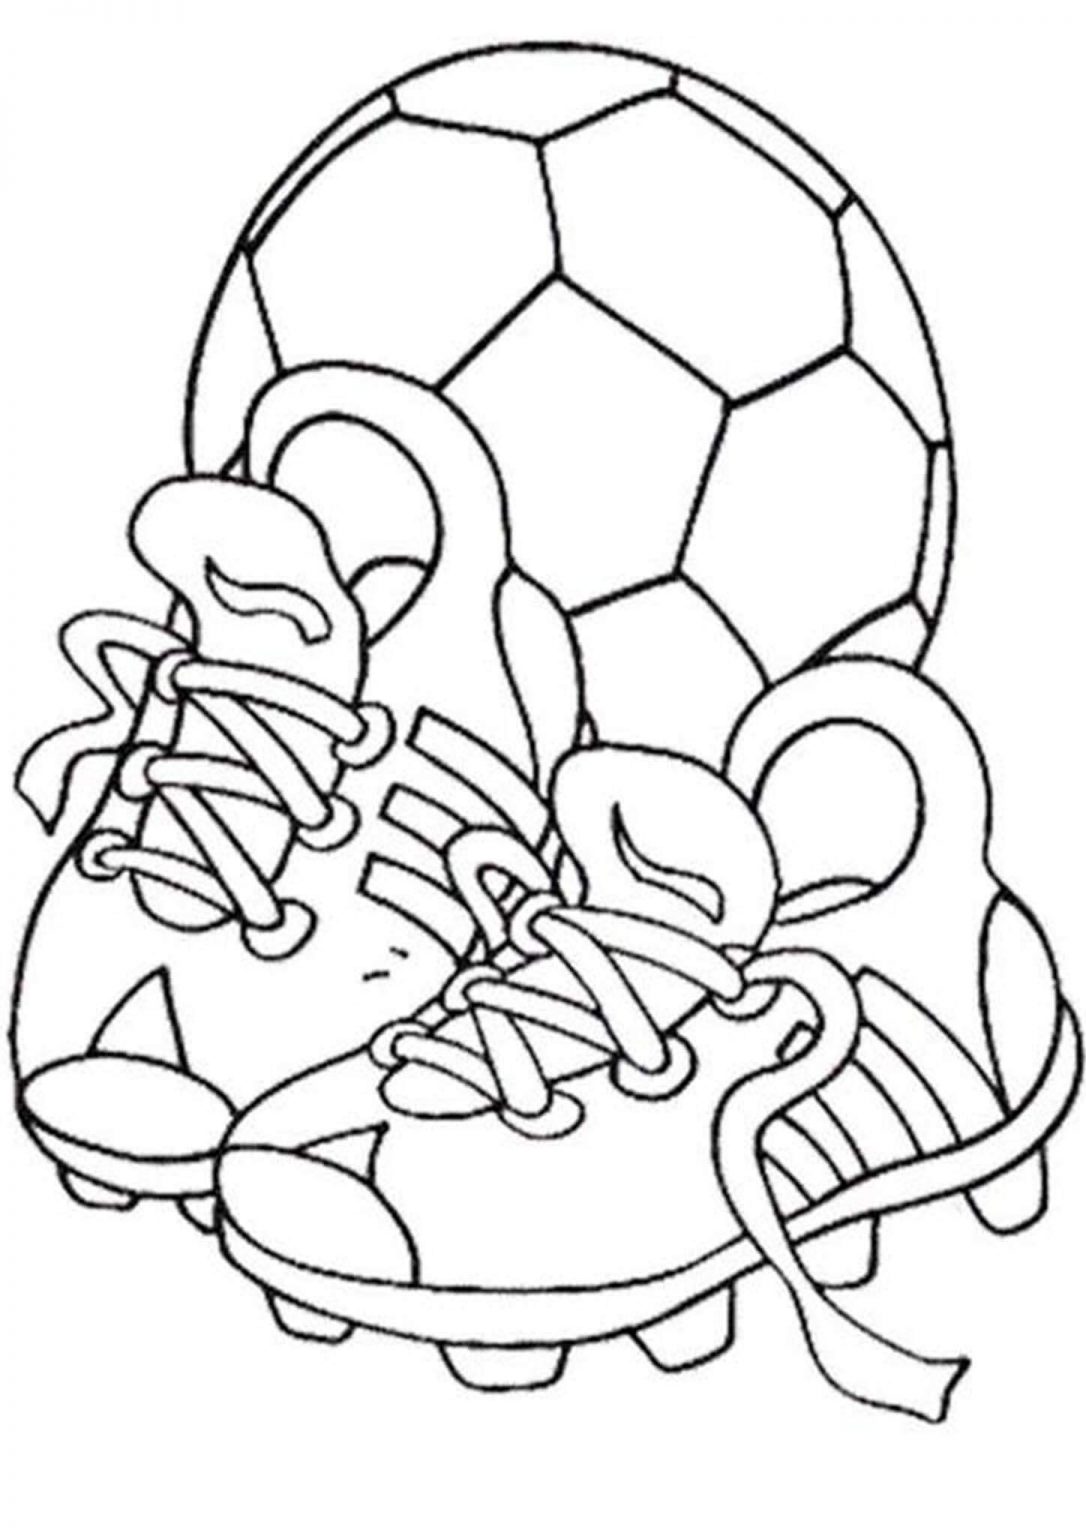 Free & Easy To Print Soccer Coloring Pages - Tulamama